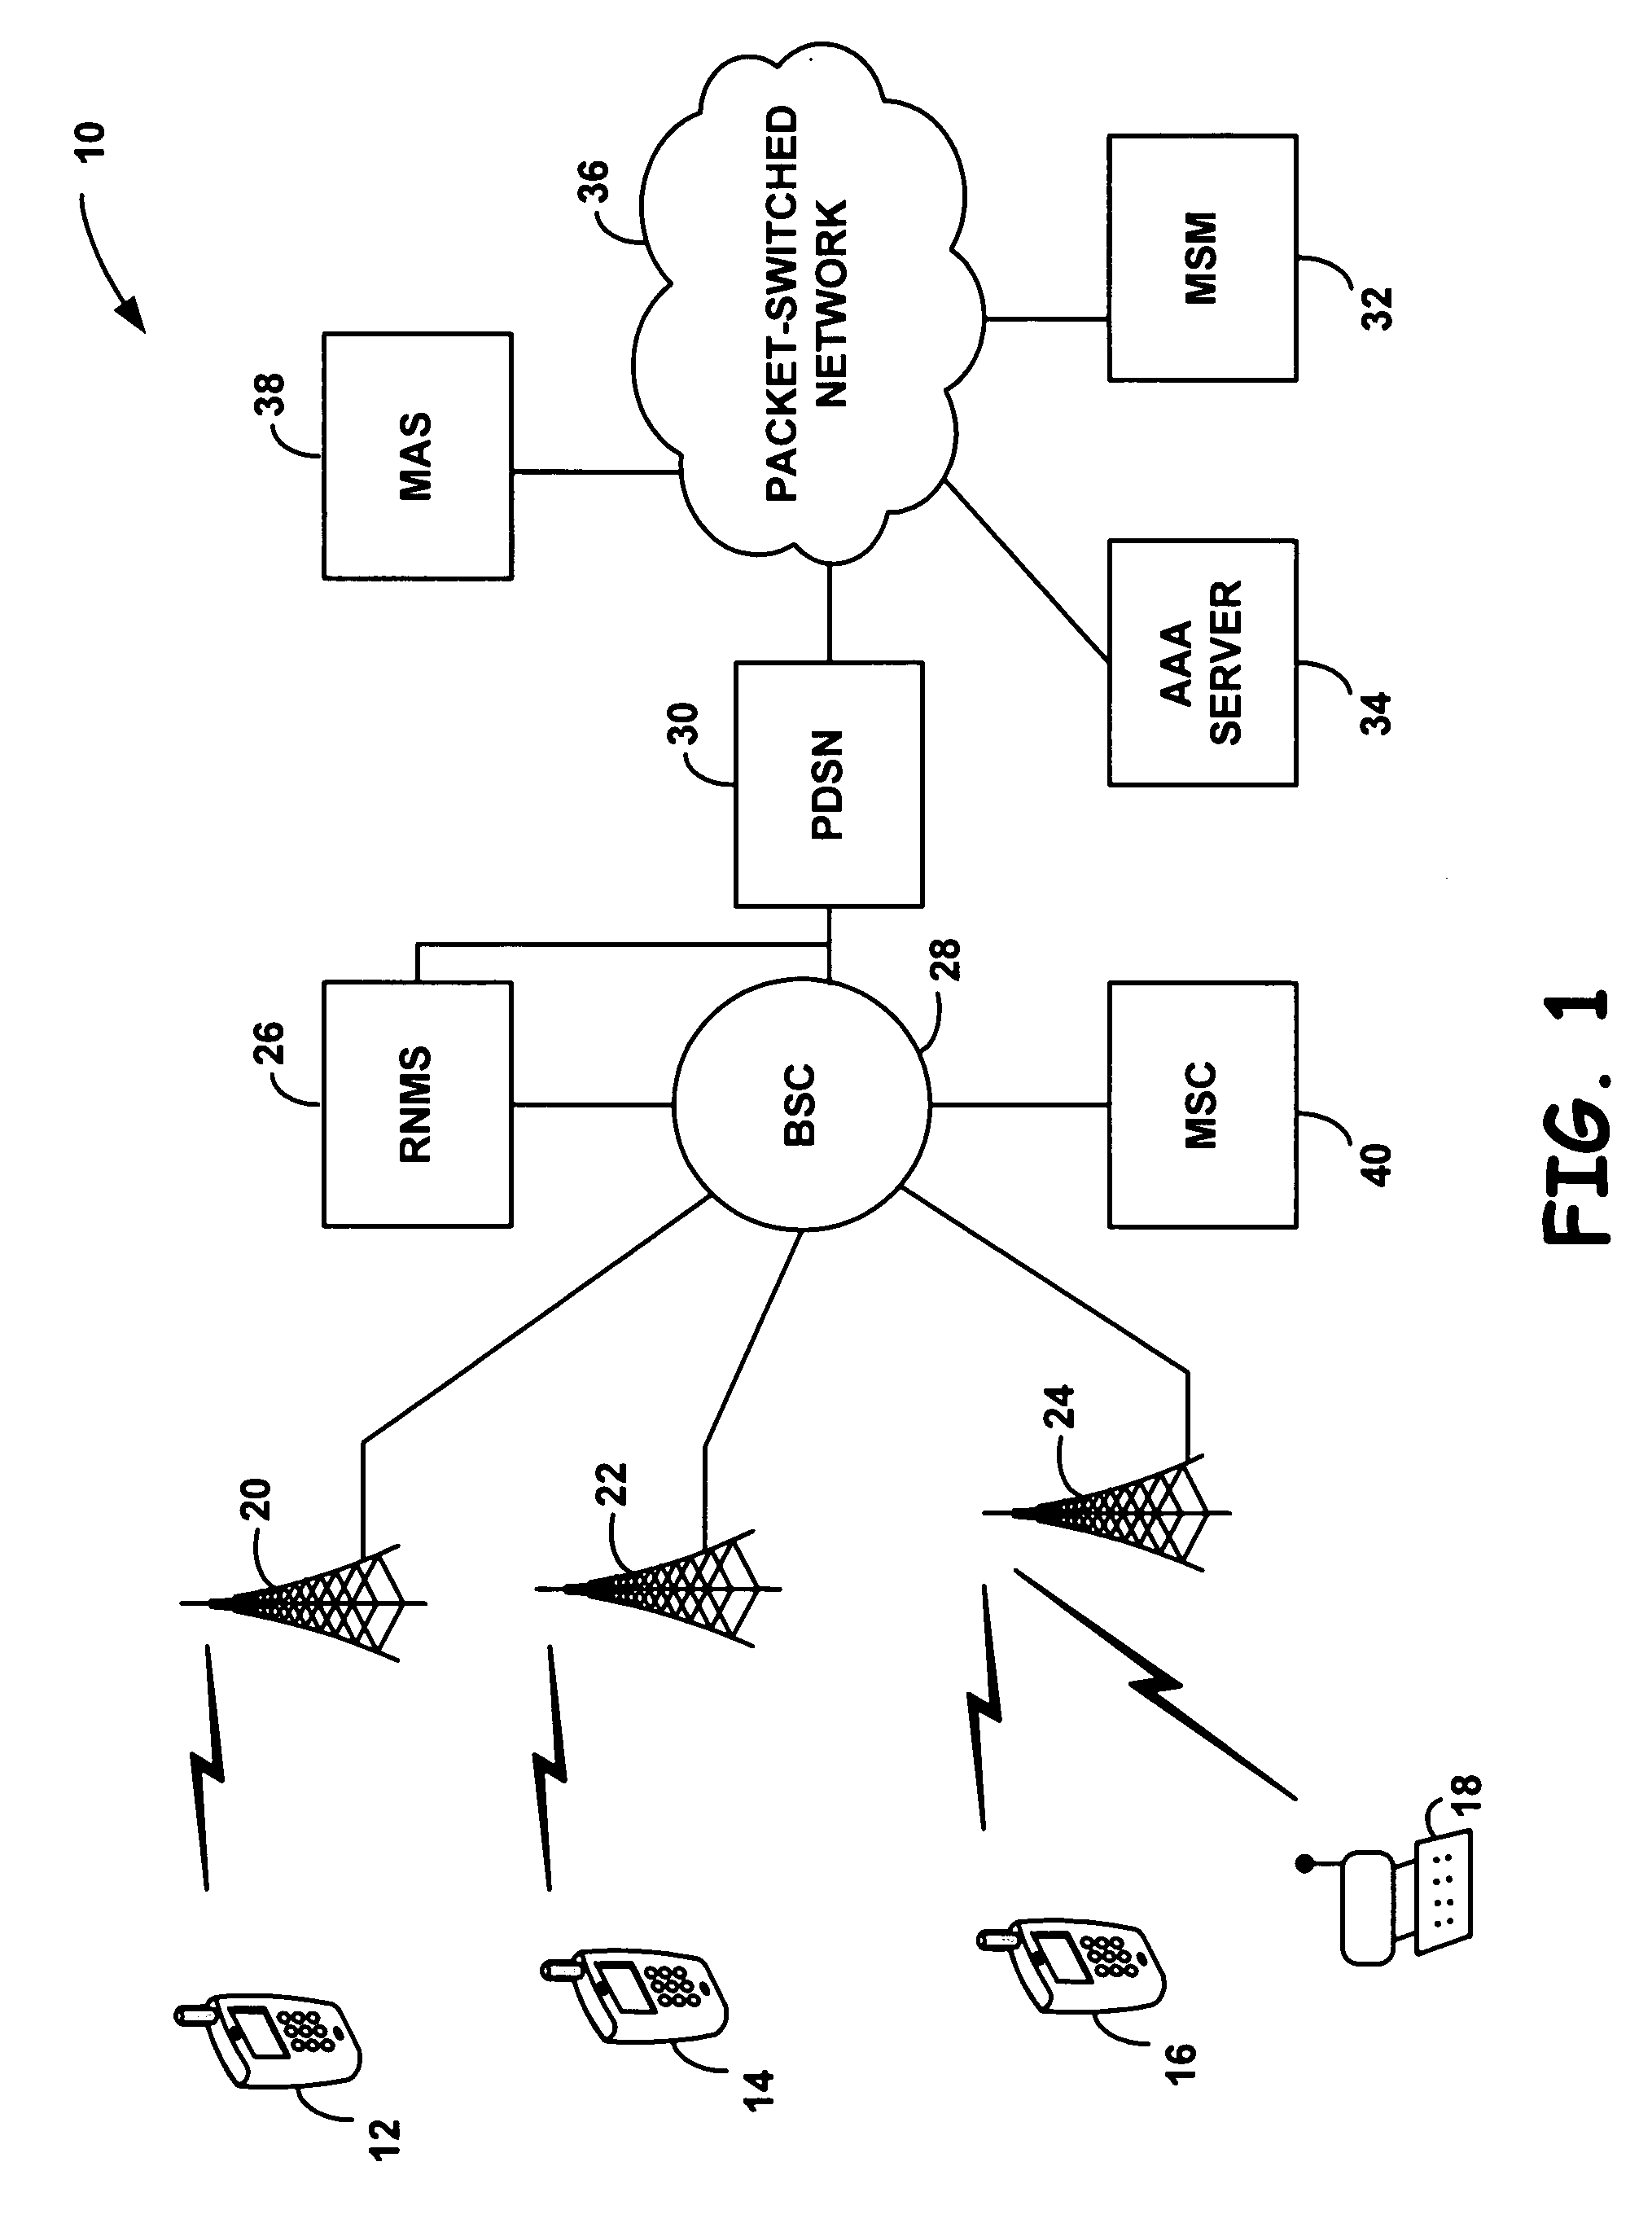 Method and system for multicasting messages to select mobile recipients